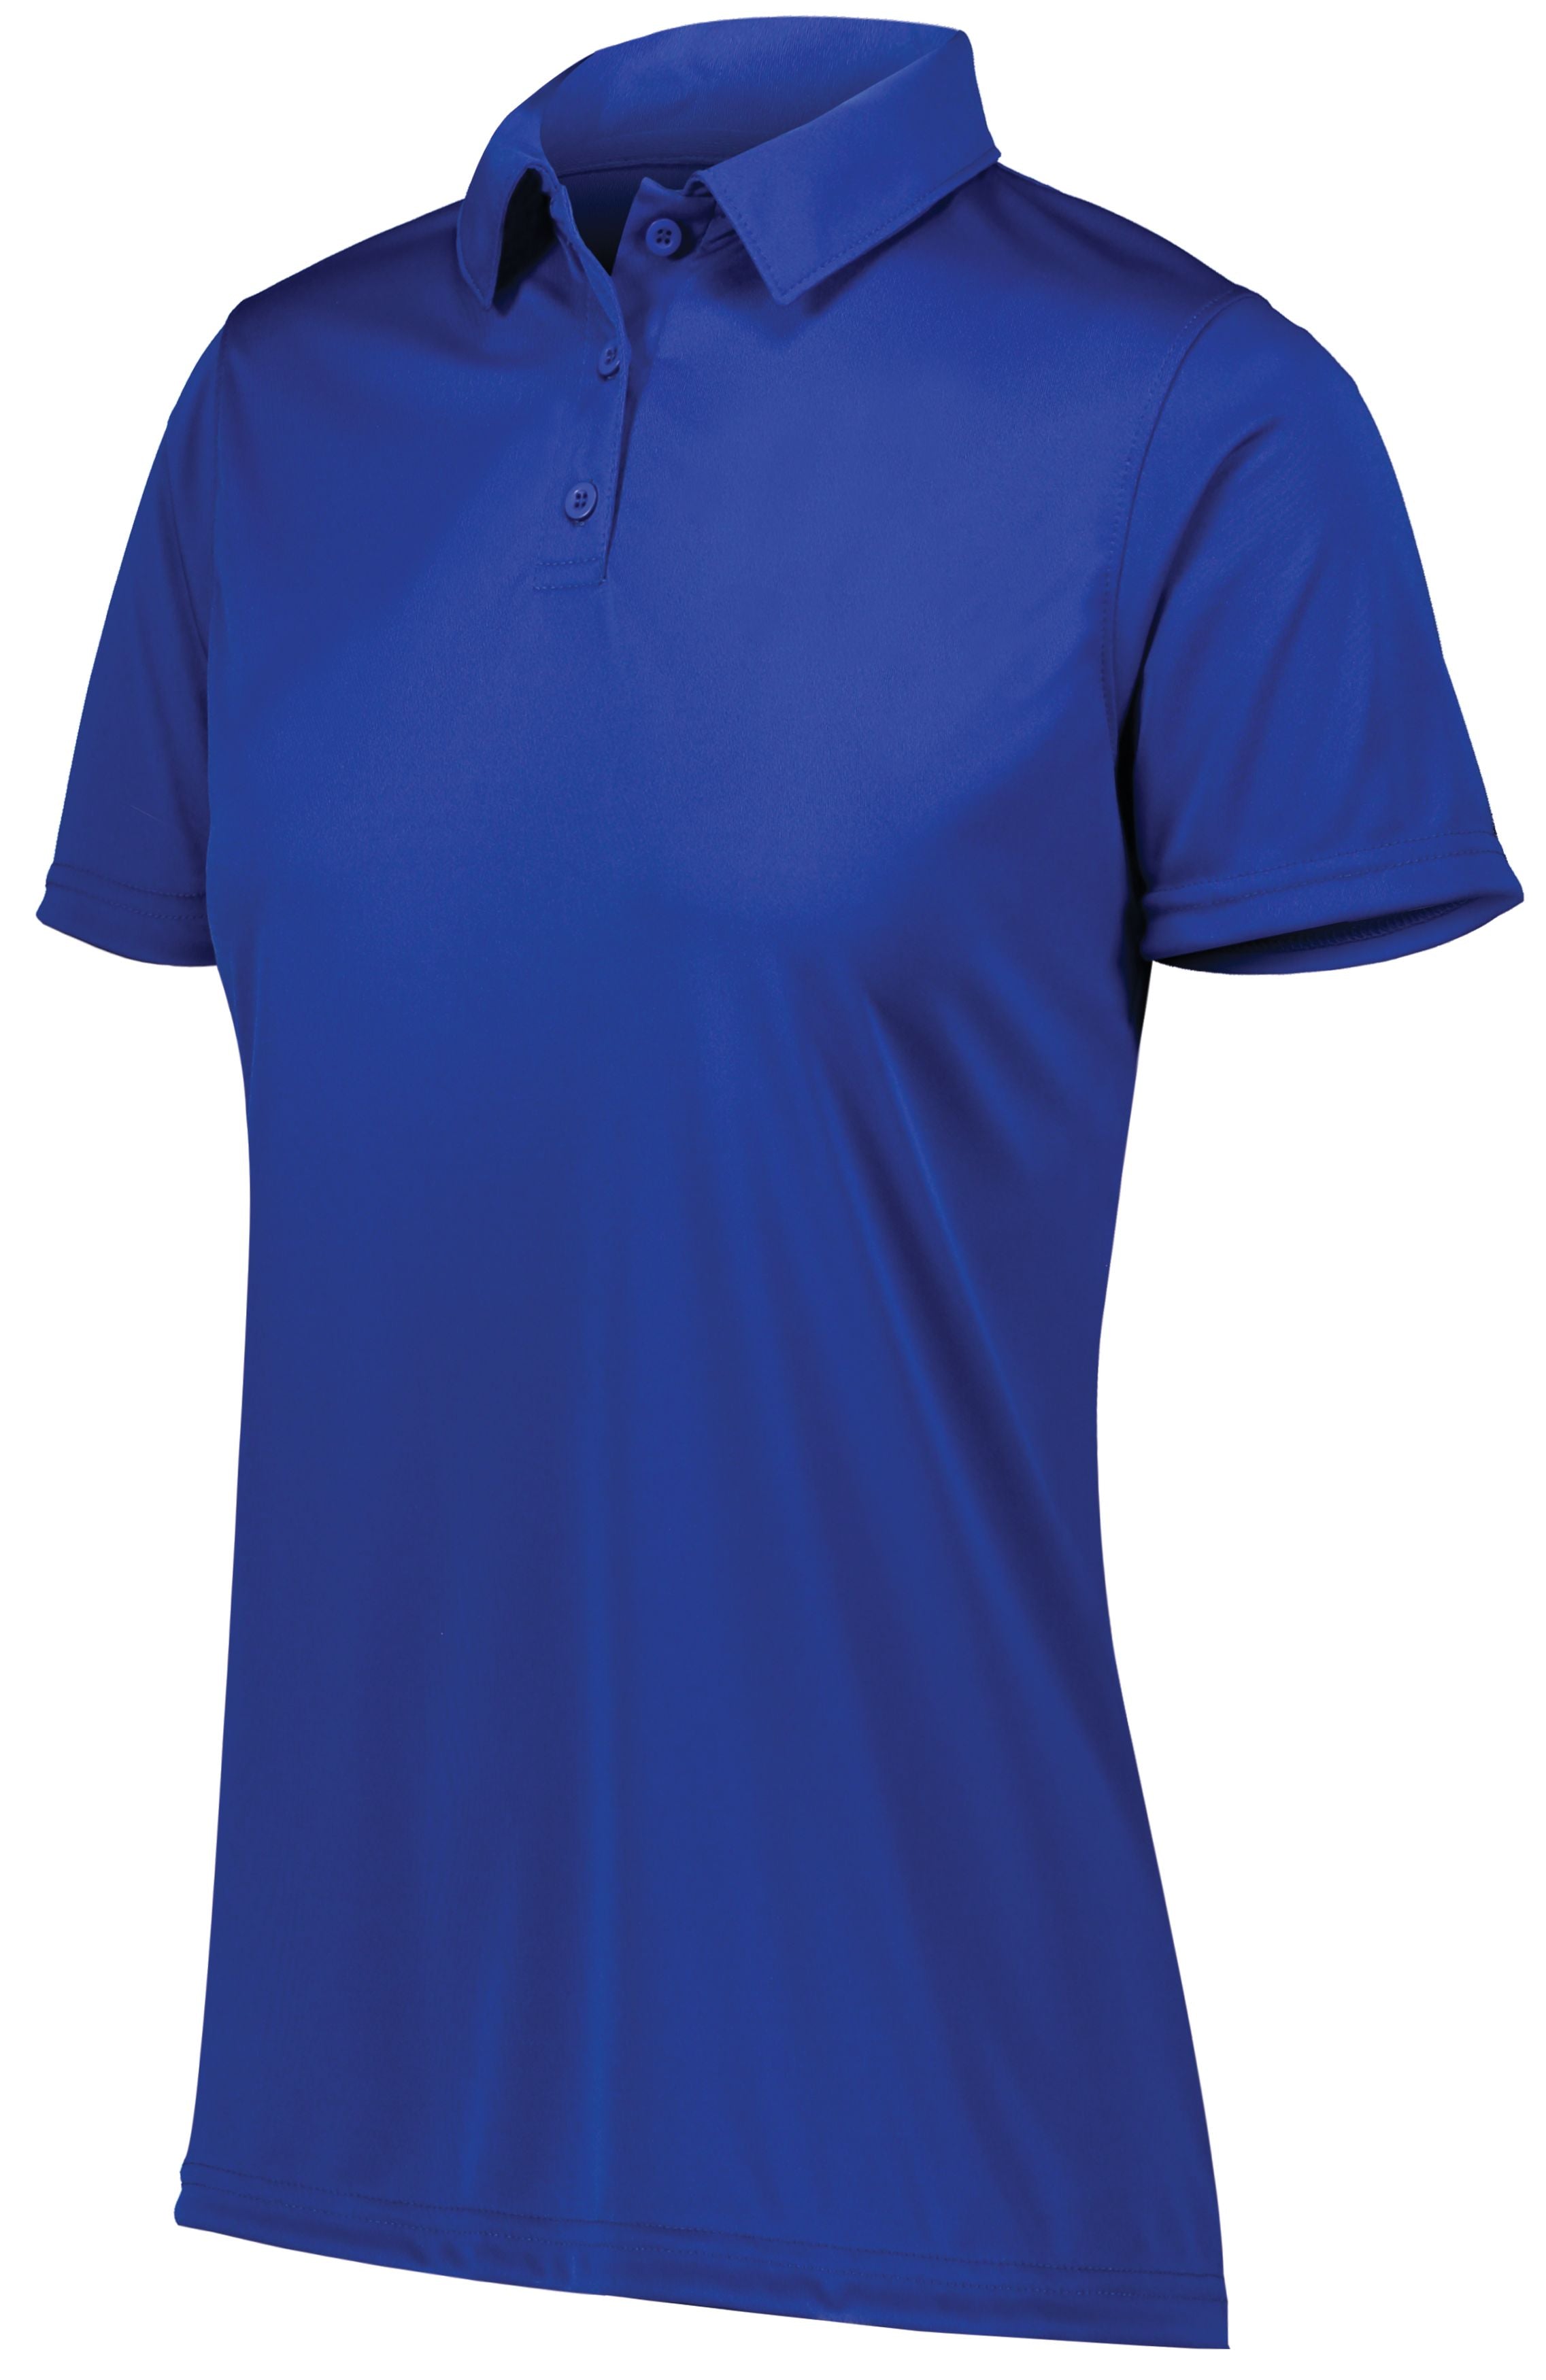 Augusta Sportswear Ladies Vital Polo in Royal  -Part of the Ladies, Ladies-Polo, Polos, Augusta-Products, Shirts product lines at KanaleyCreations.com